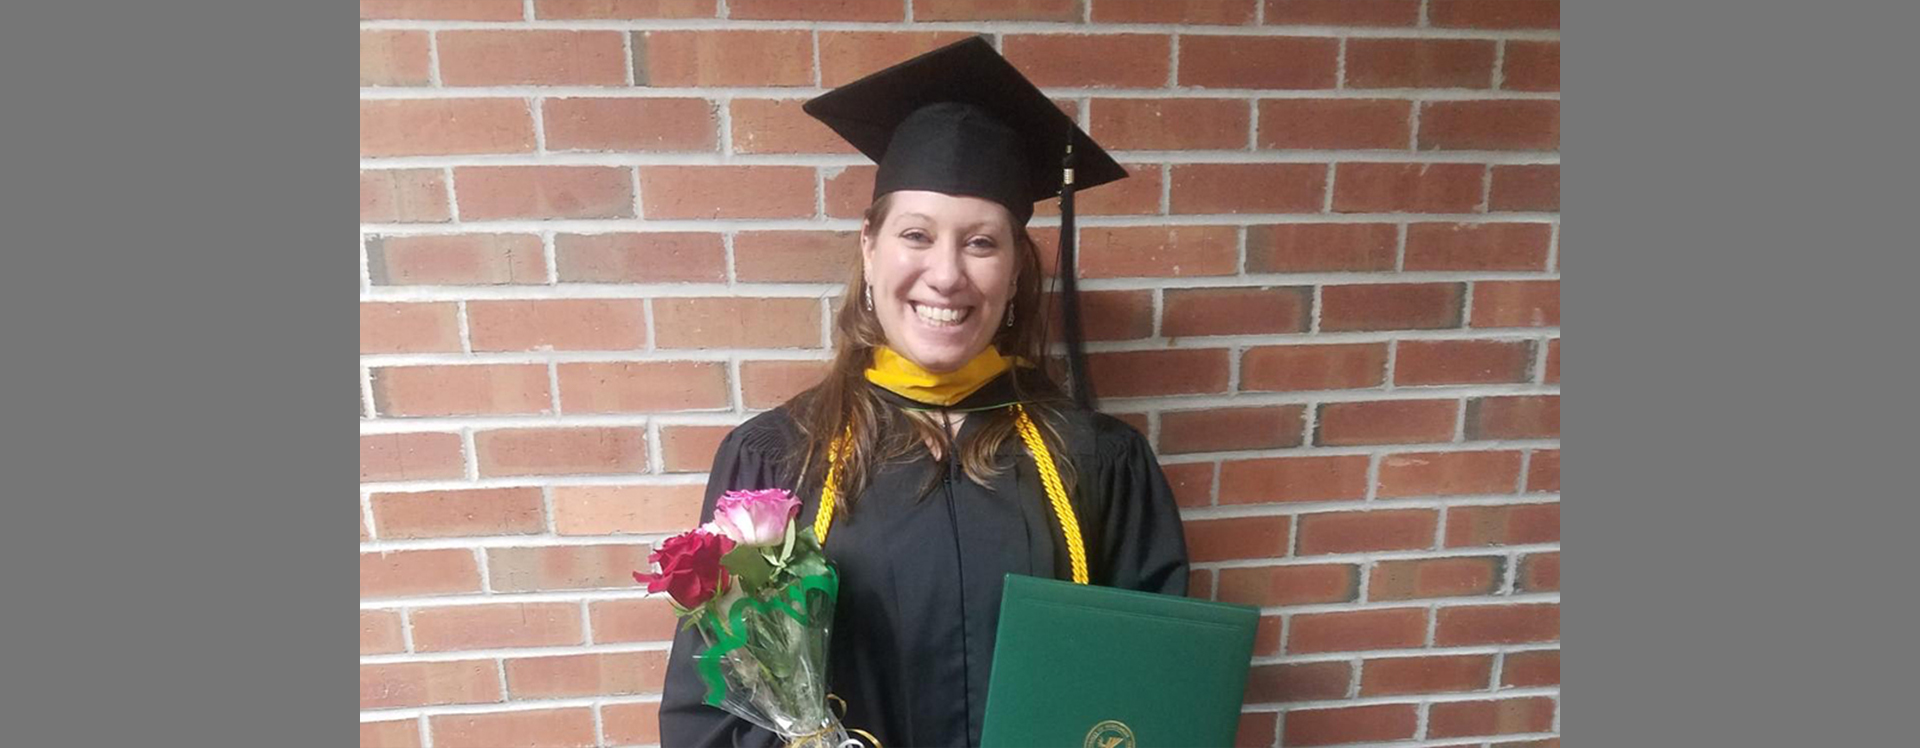 Laura Kuglitsch smiling in her cap and gown at her 2018 master's graduation.